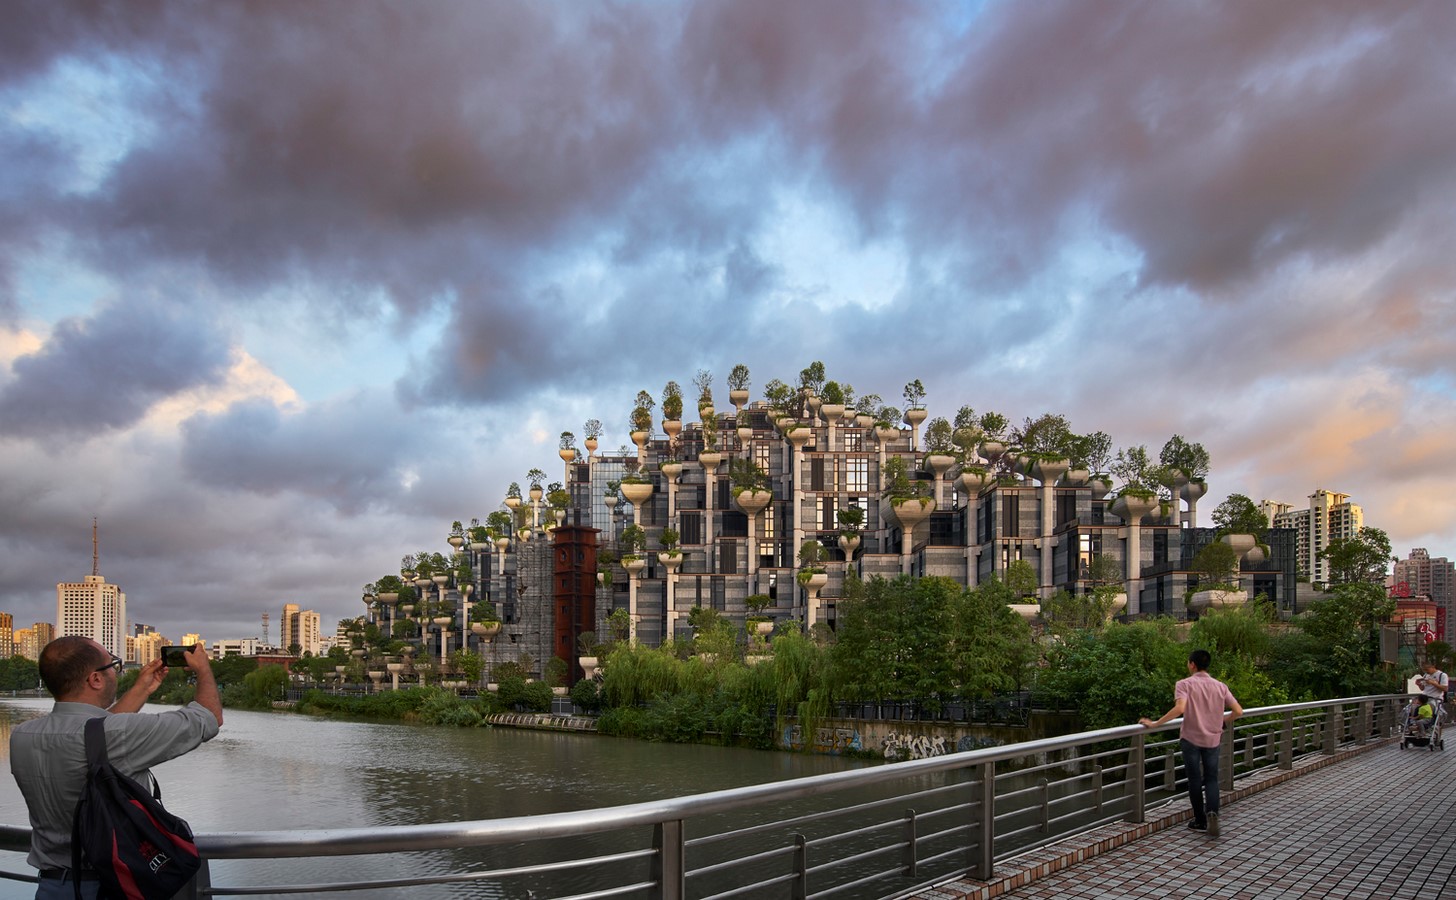 1,000 Trees shopping centre in Shanghai unveiled by Thomas Heatherwick - Sheet5